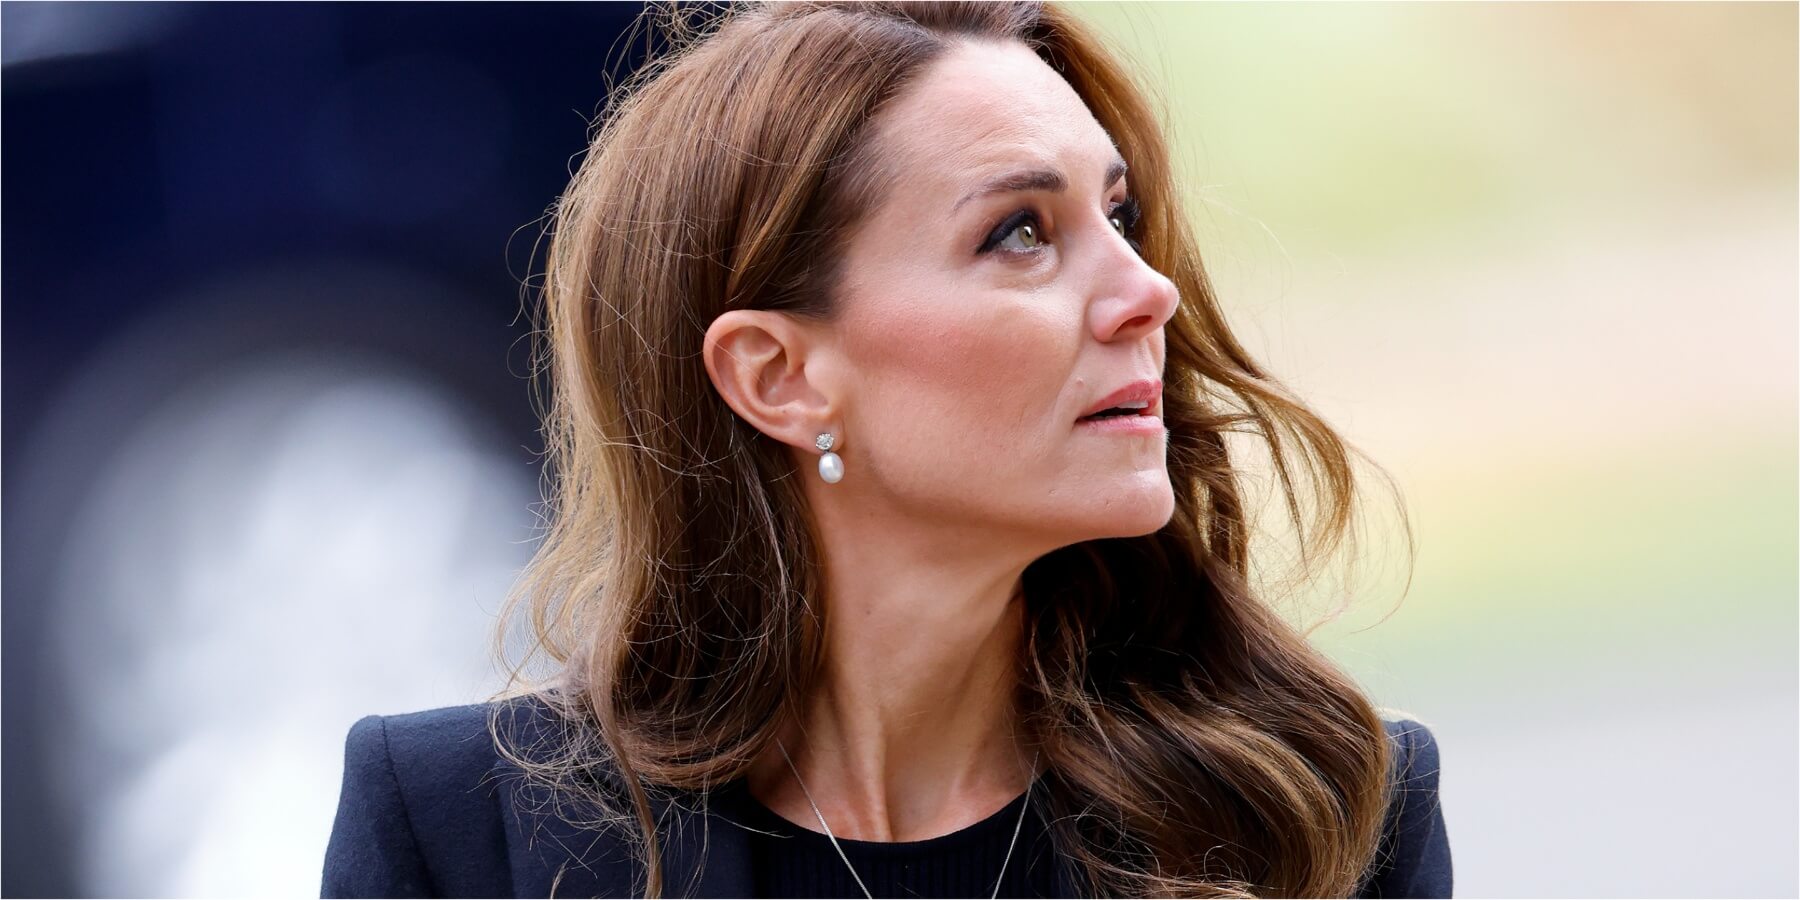 Kate Middleton's 'Tough Time' Amid 'Unhealthy' Speculation on Her ...